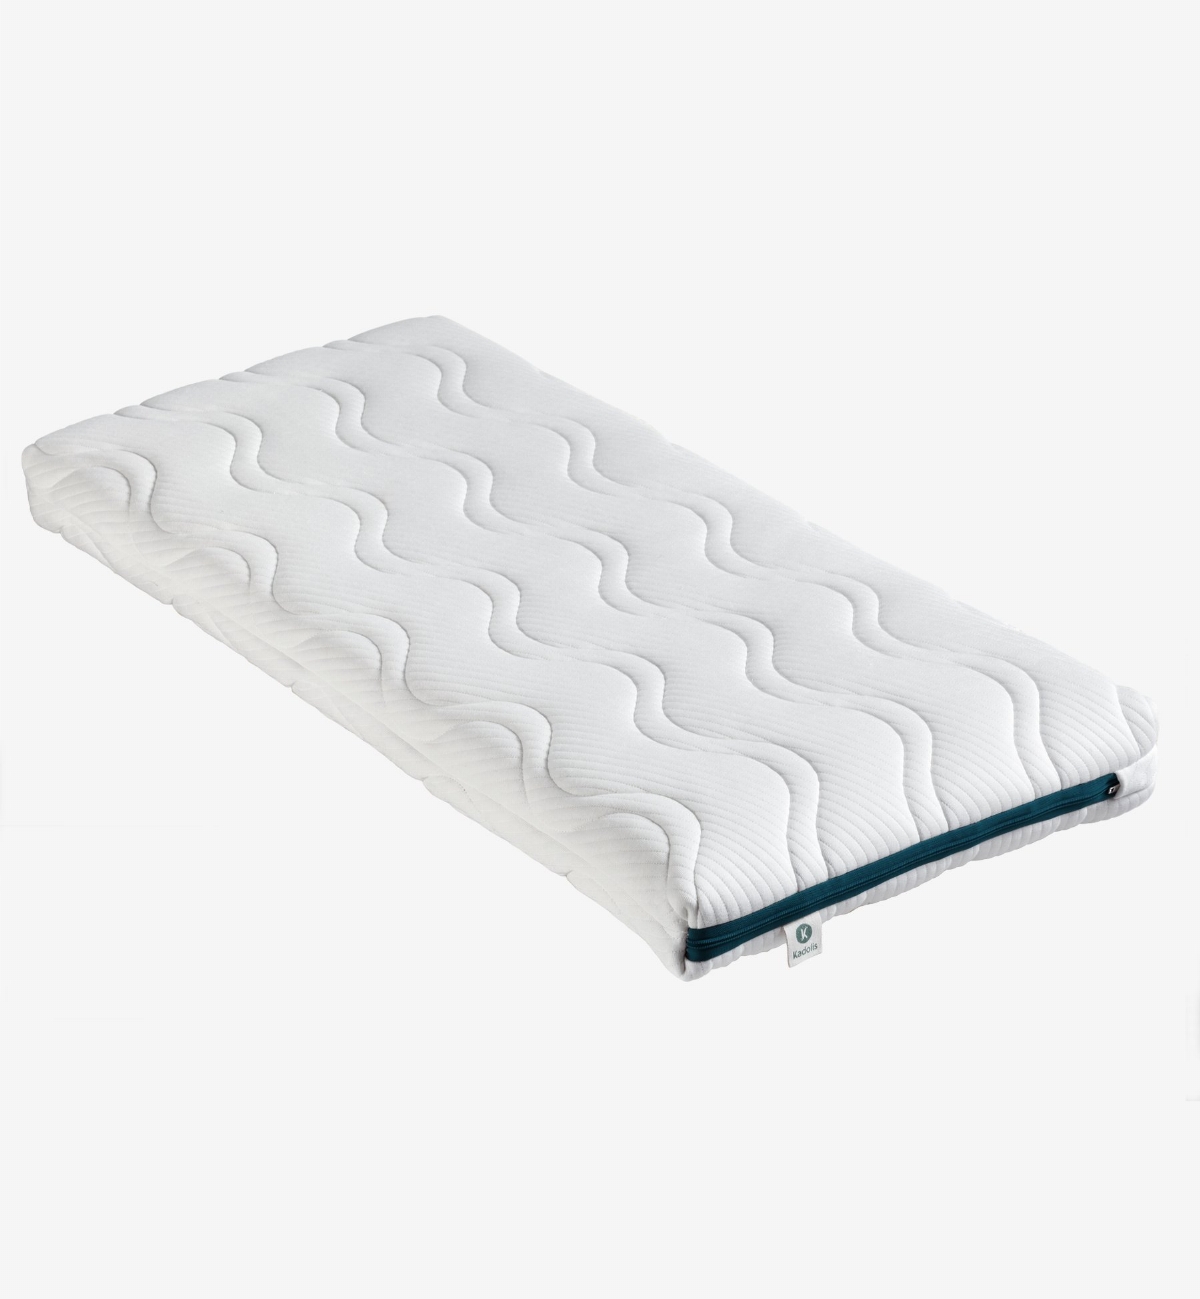 Organic cocolatex cradle mattress with removable covers